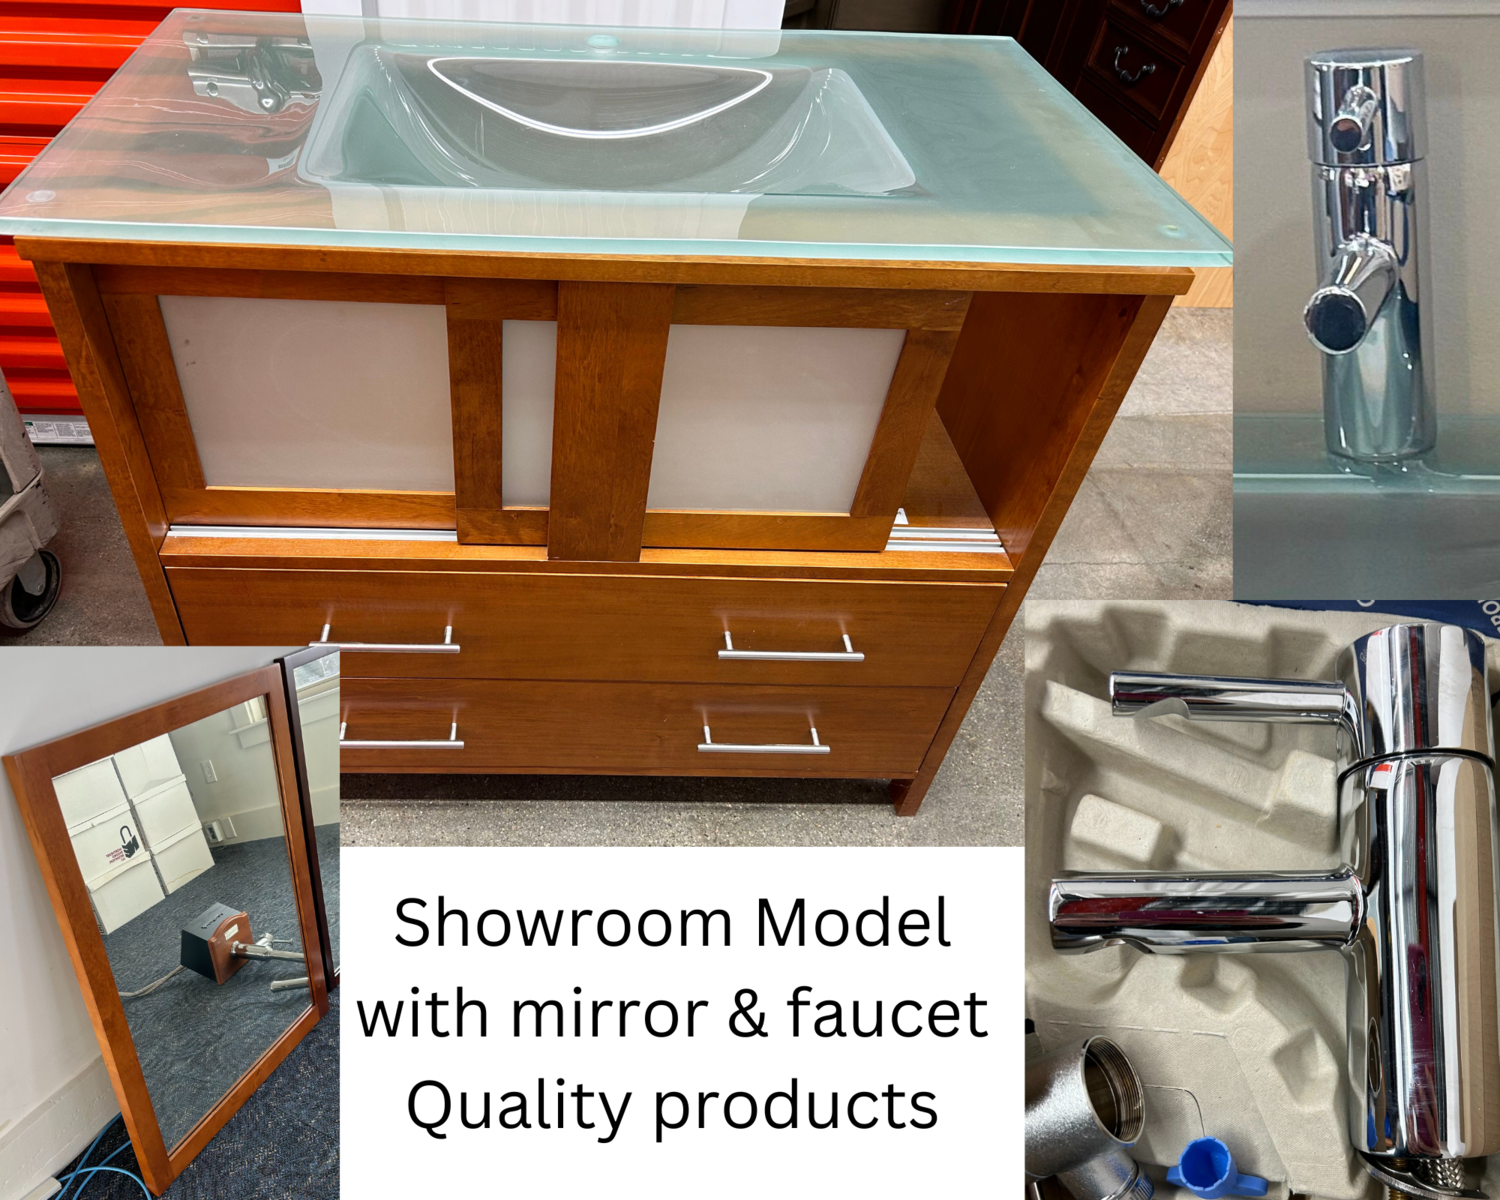 High-end 36&quot; Bathroom Vanity, glass top, w/ mirror &amp; faucet ** new price #1048 ** 2 mos. to sell, clearance &amp; 30% off